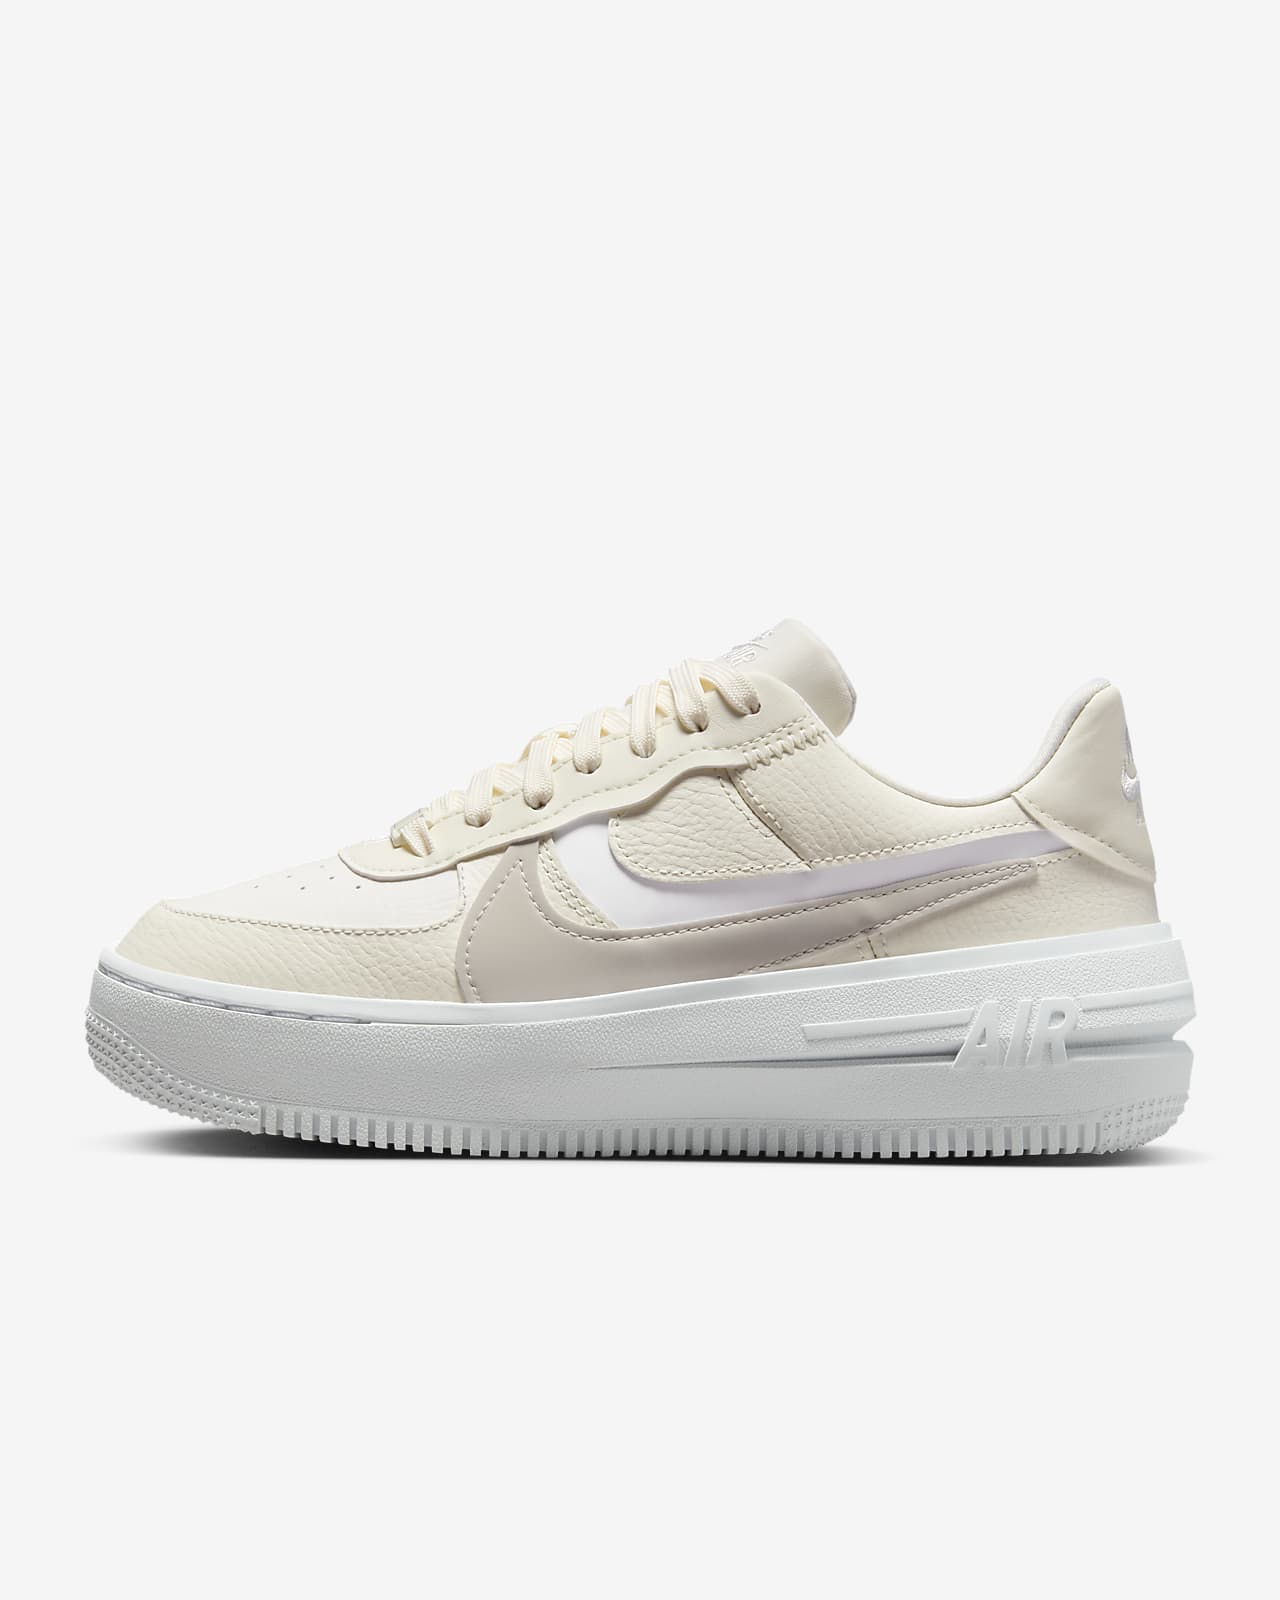 Chaussures Nike Air Force 1 PLT.AF.ORM pour Femme. Nike LU